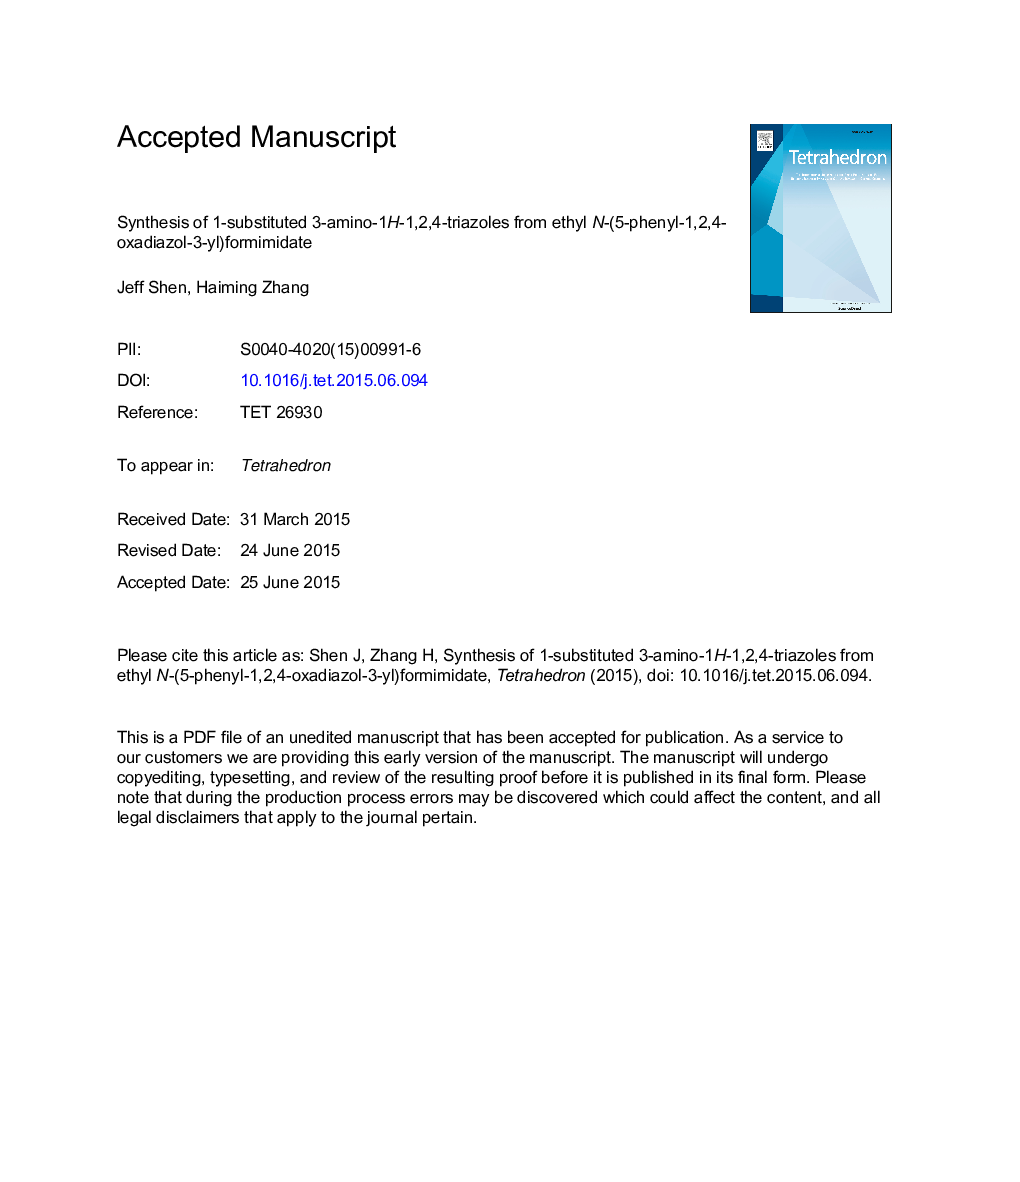 Synthesis of 1-substituted 3-amino-1H-1,2,4-triazoles from ethyl N-(5-phenyl-1,2,4-oxadiazol-3-yl)formimidate